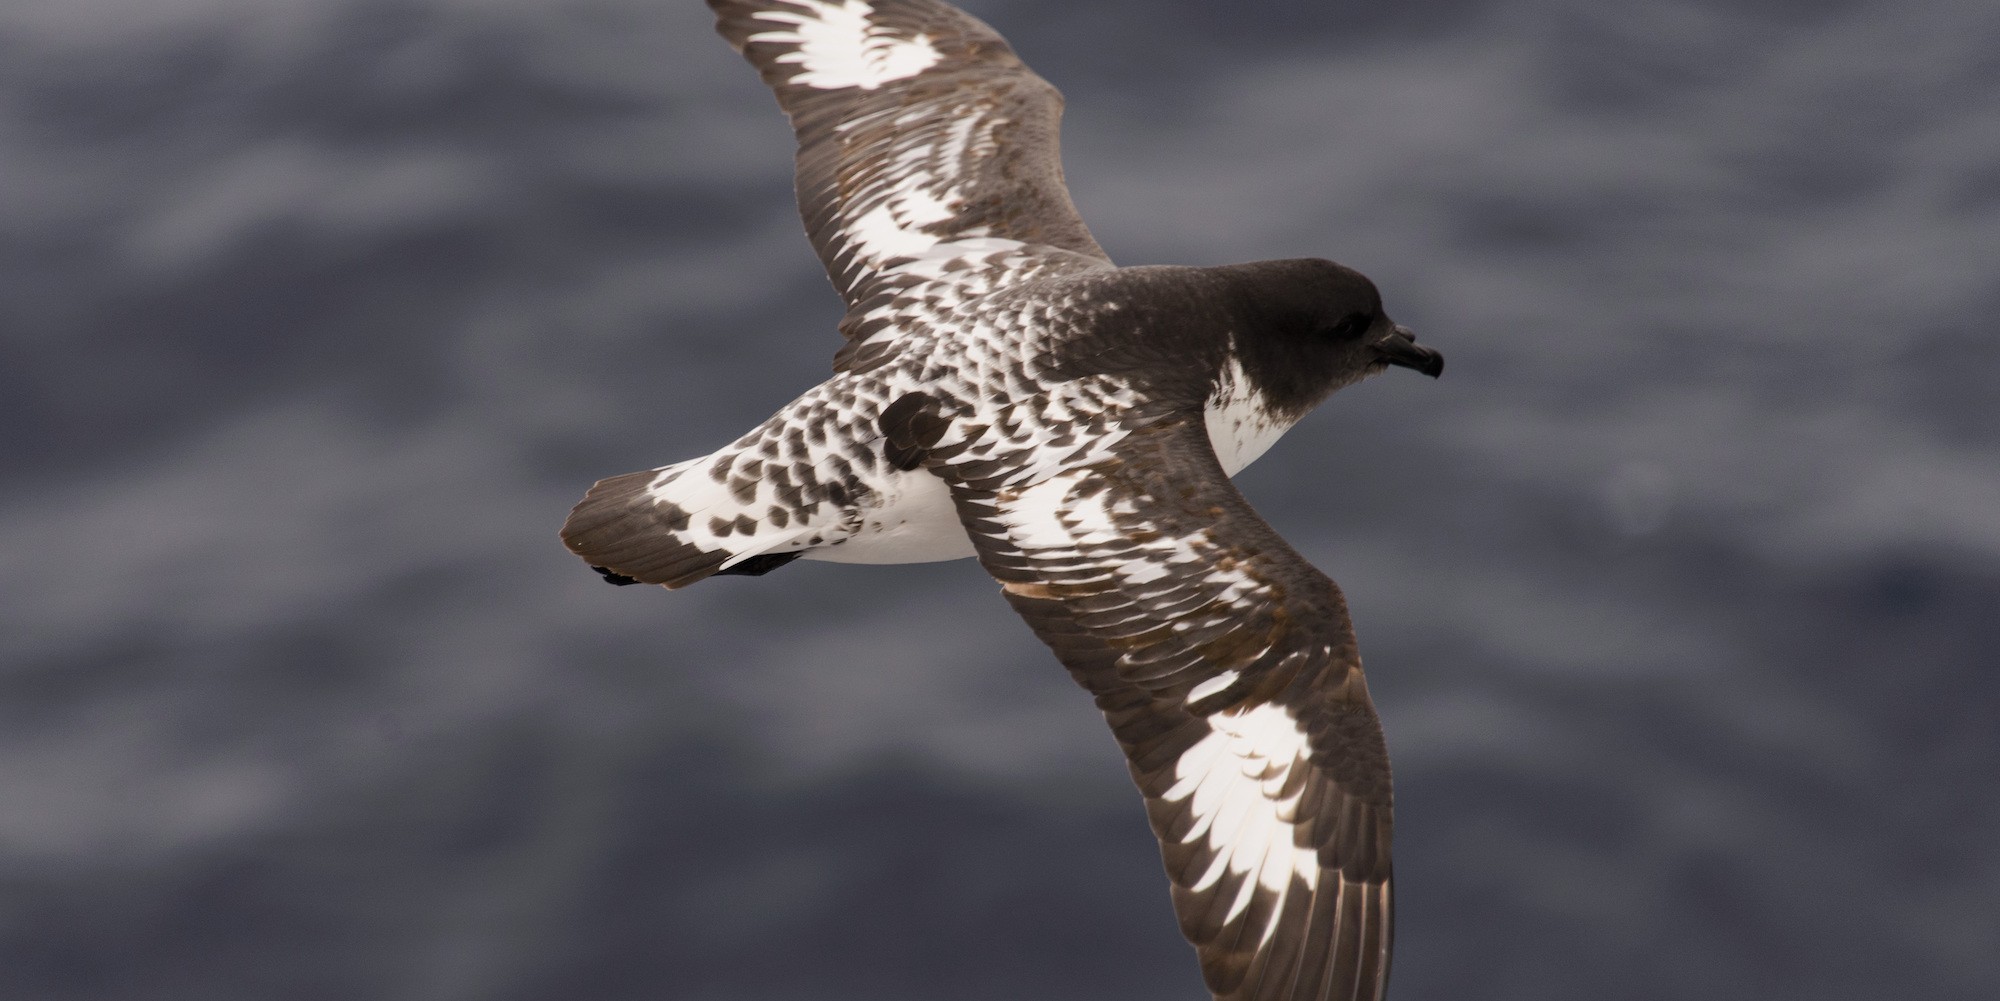 Top down view of an Antarctic Petrel bird flying on a gloomy day